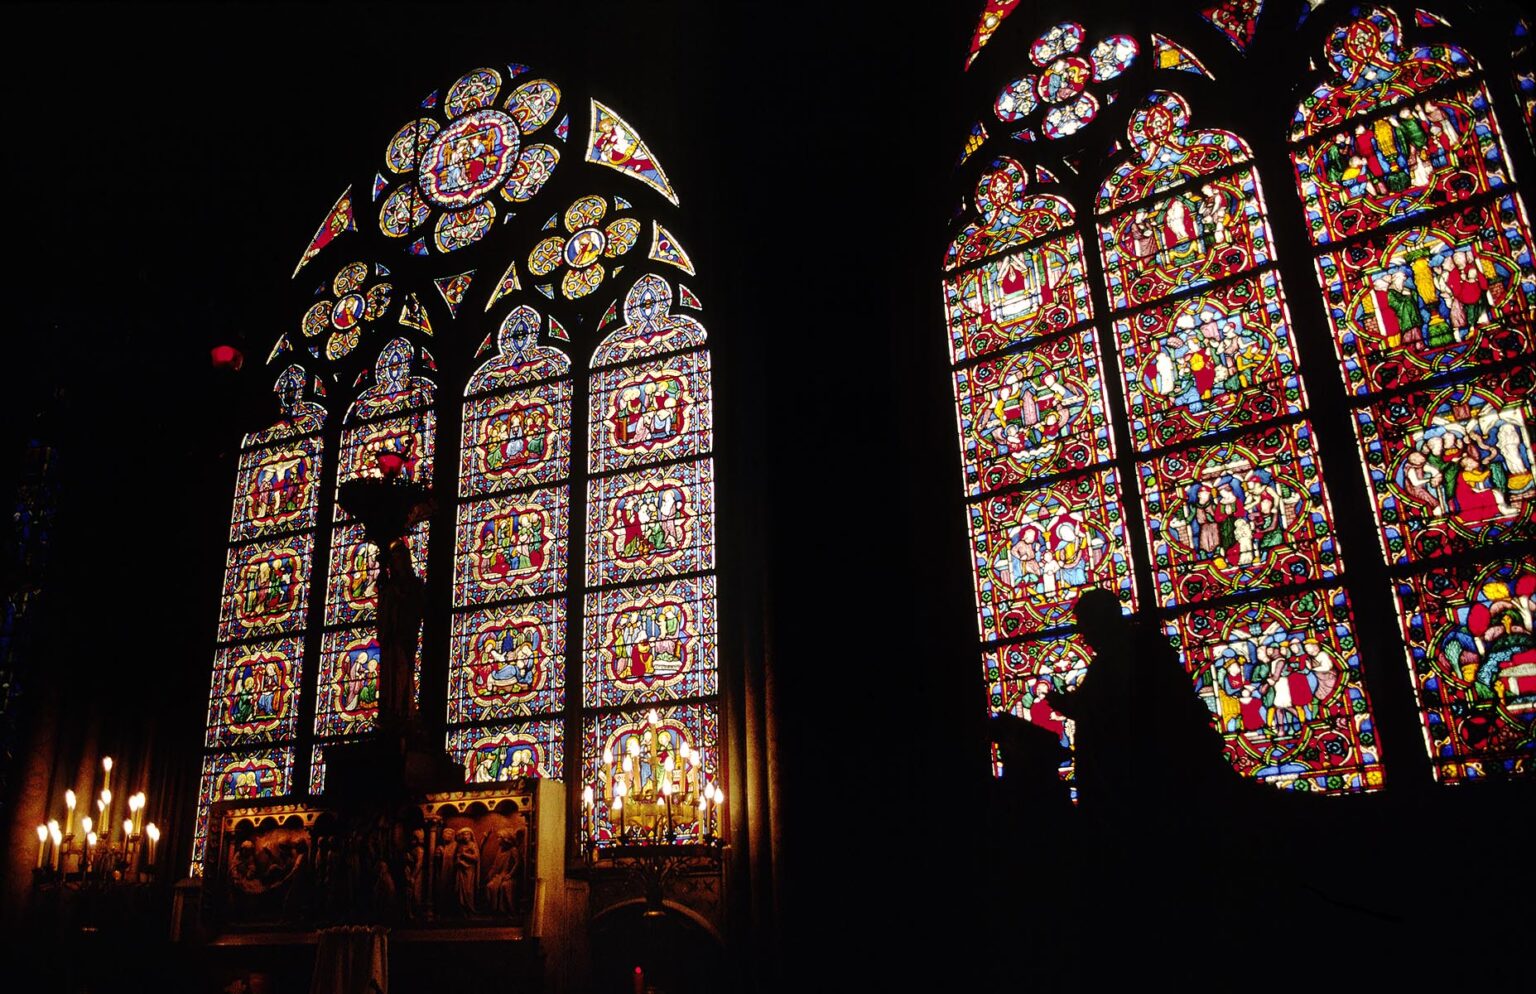 STAINED GLASS WINDOWS inside NOTRE DAME CATHEDRAL - PARIS, FRANCE